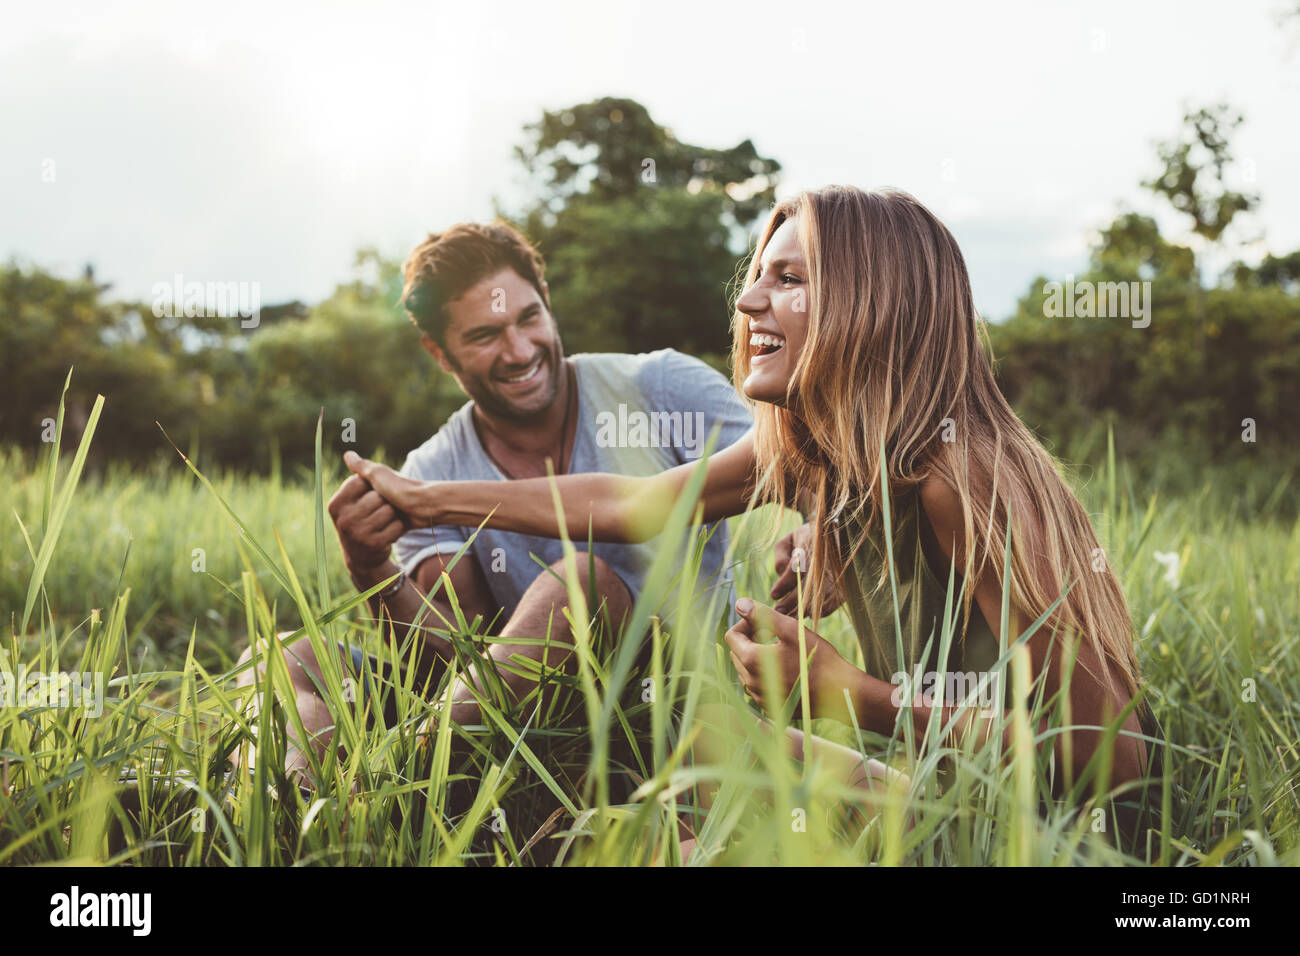 Shot of loving young couple having fun outdoors in grass field. Man and woman enjoying a day in meadow. Stock Photo